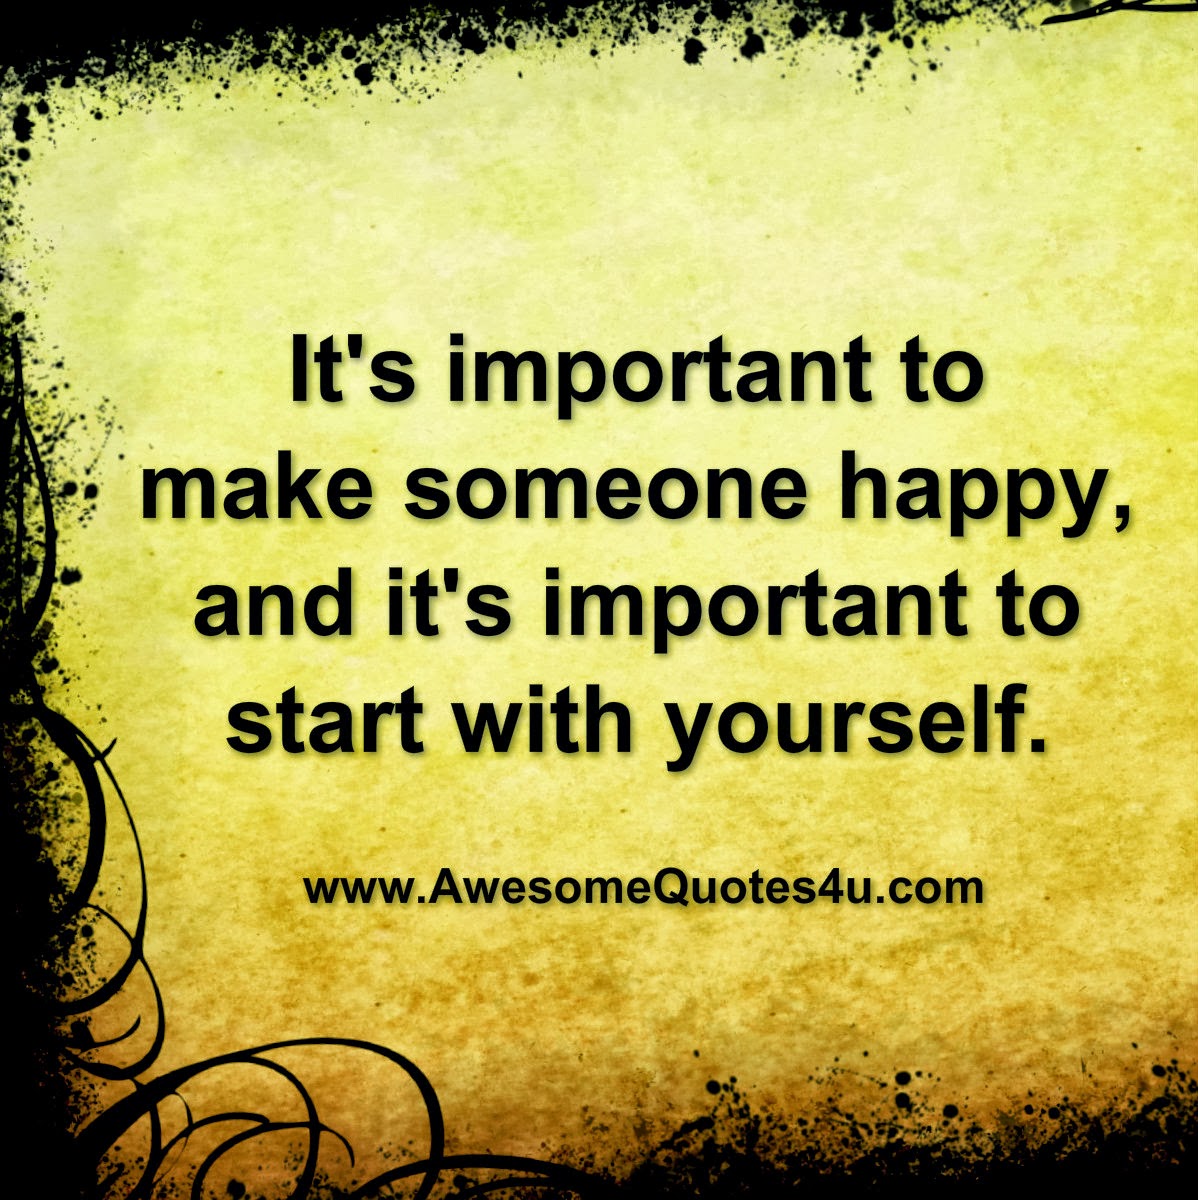 It’s important to make someone happy quote